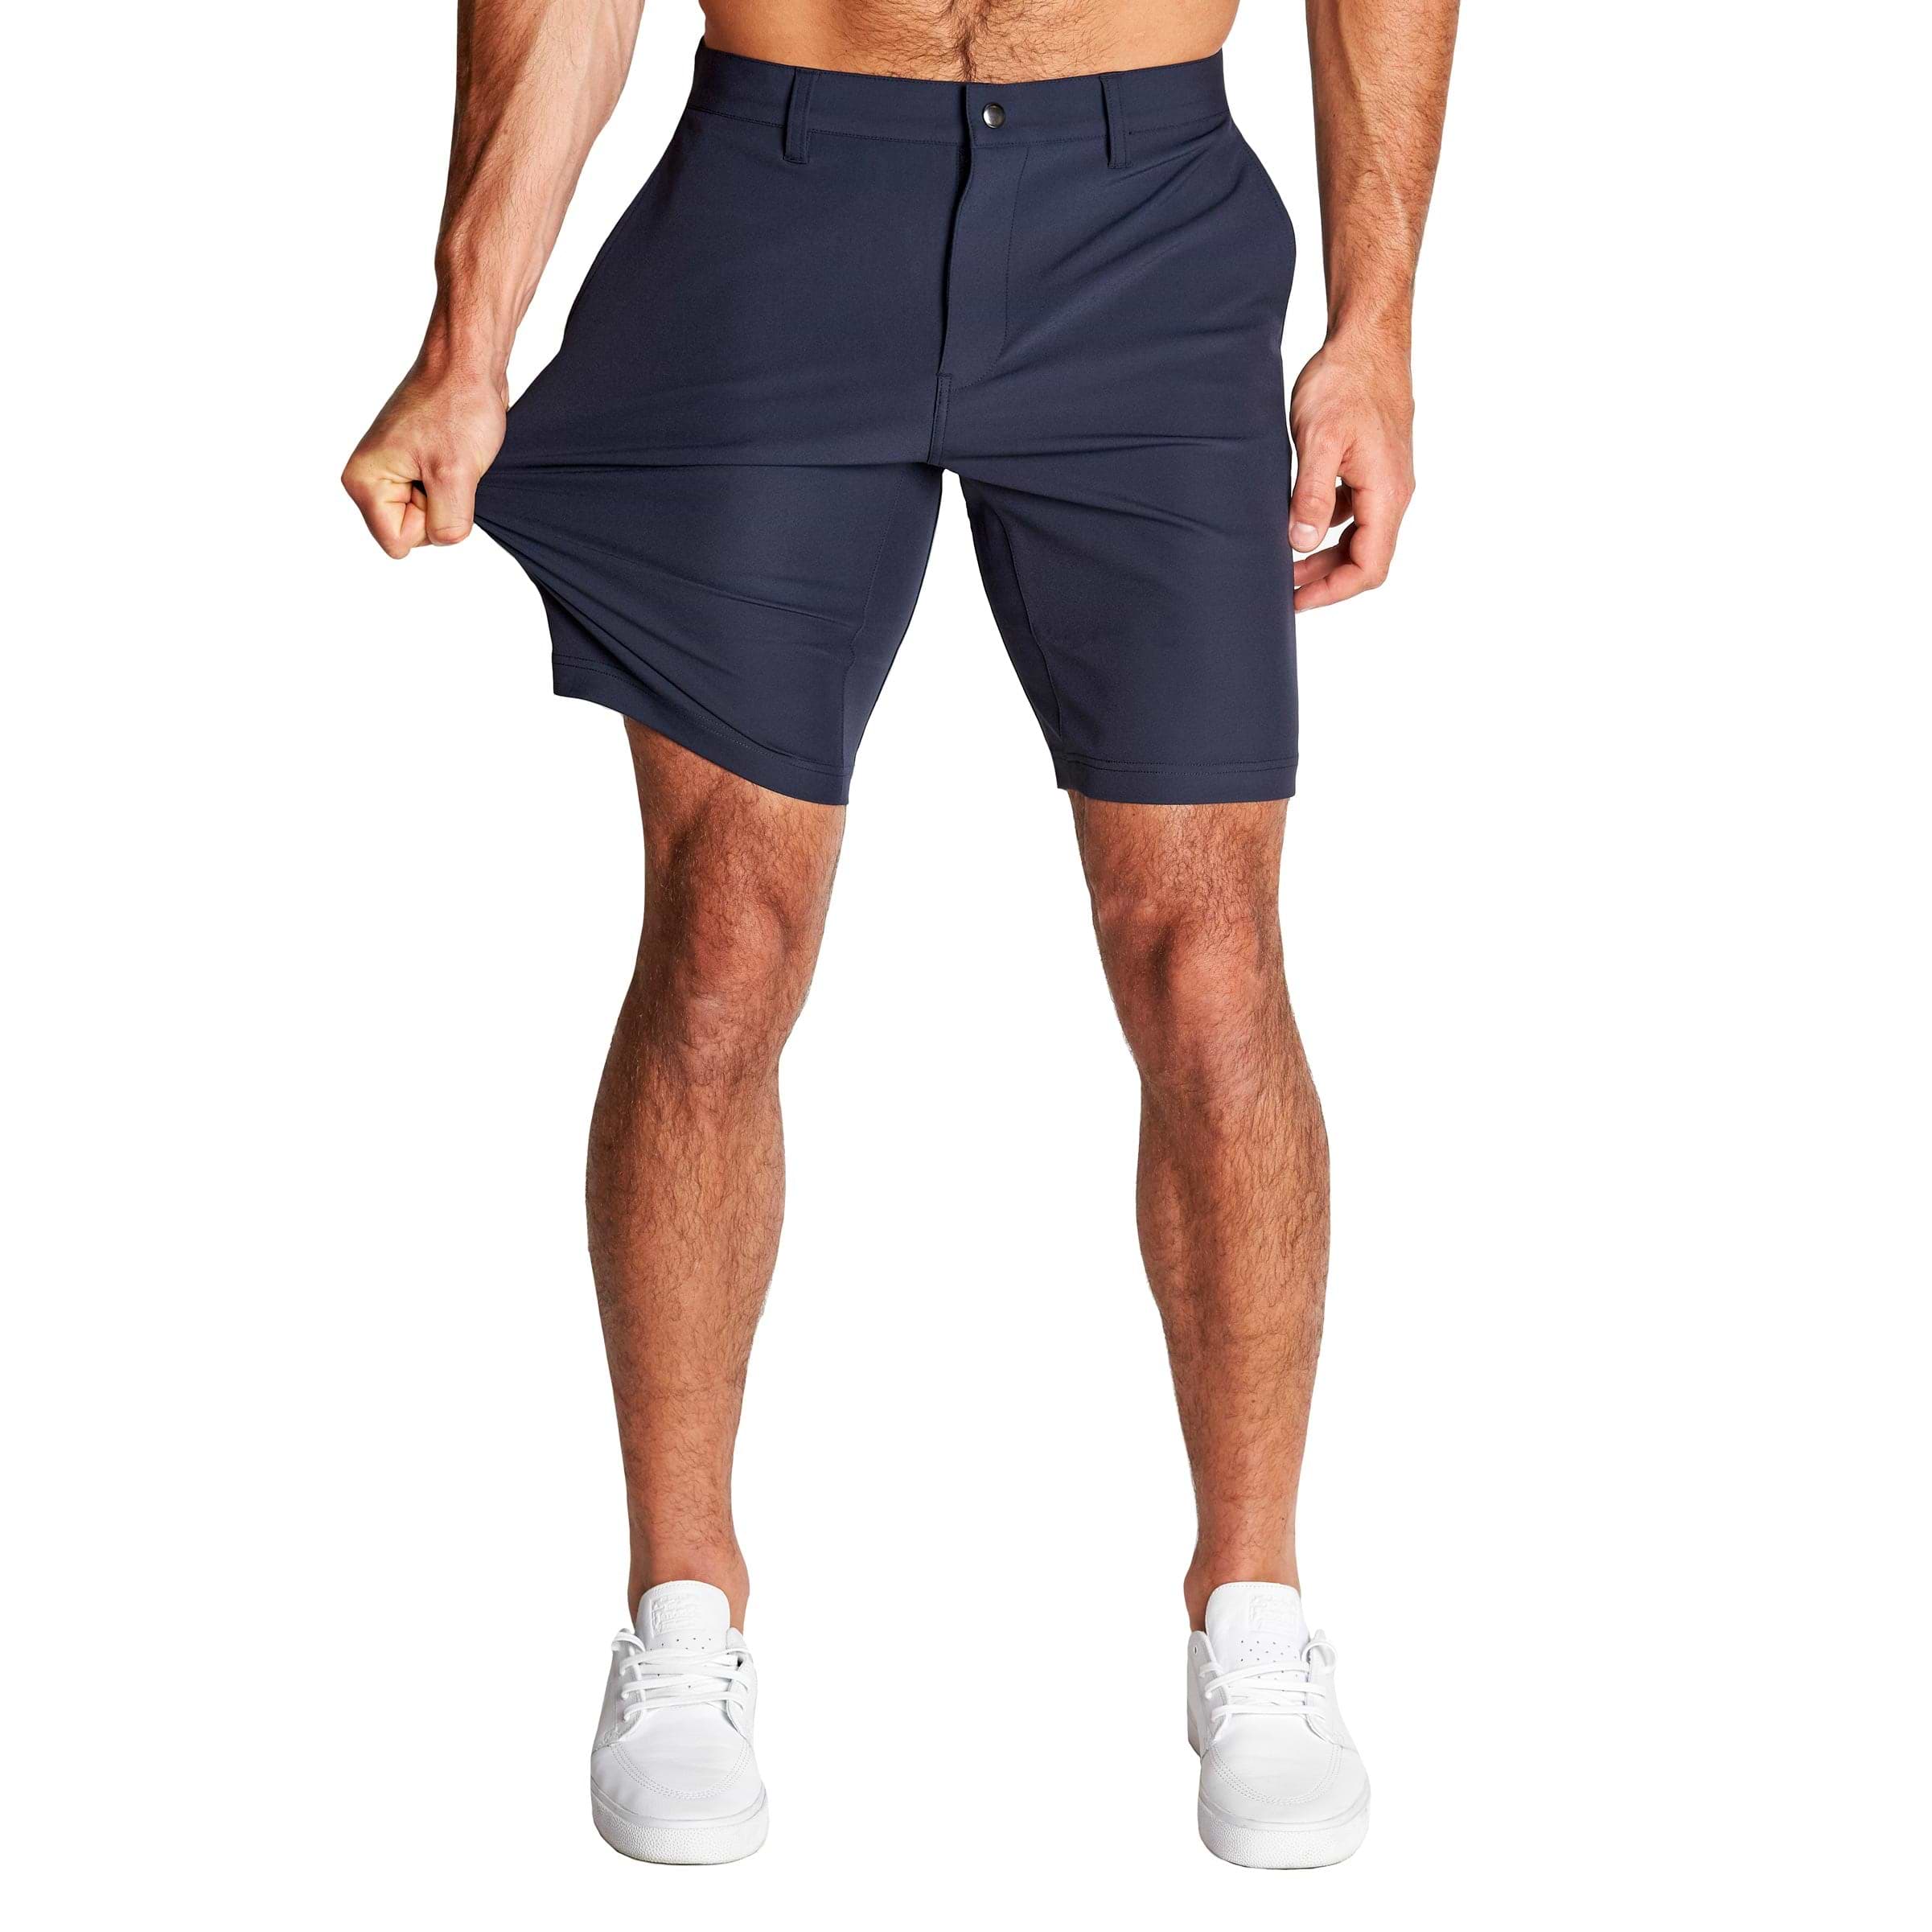 Athletic Fit Shorts - Navy